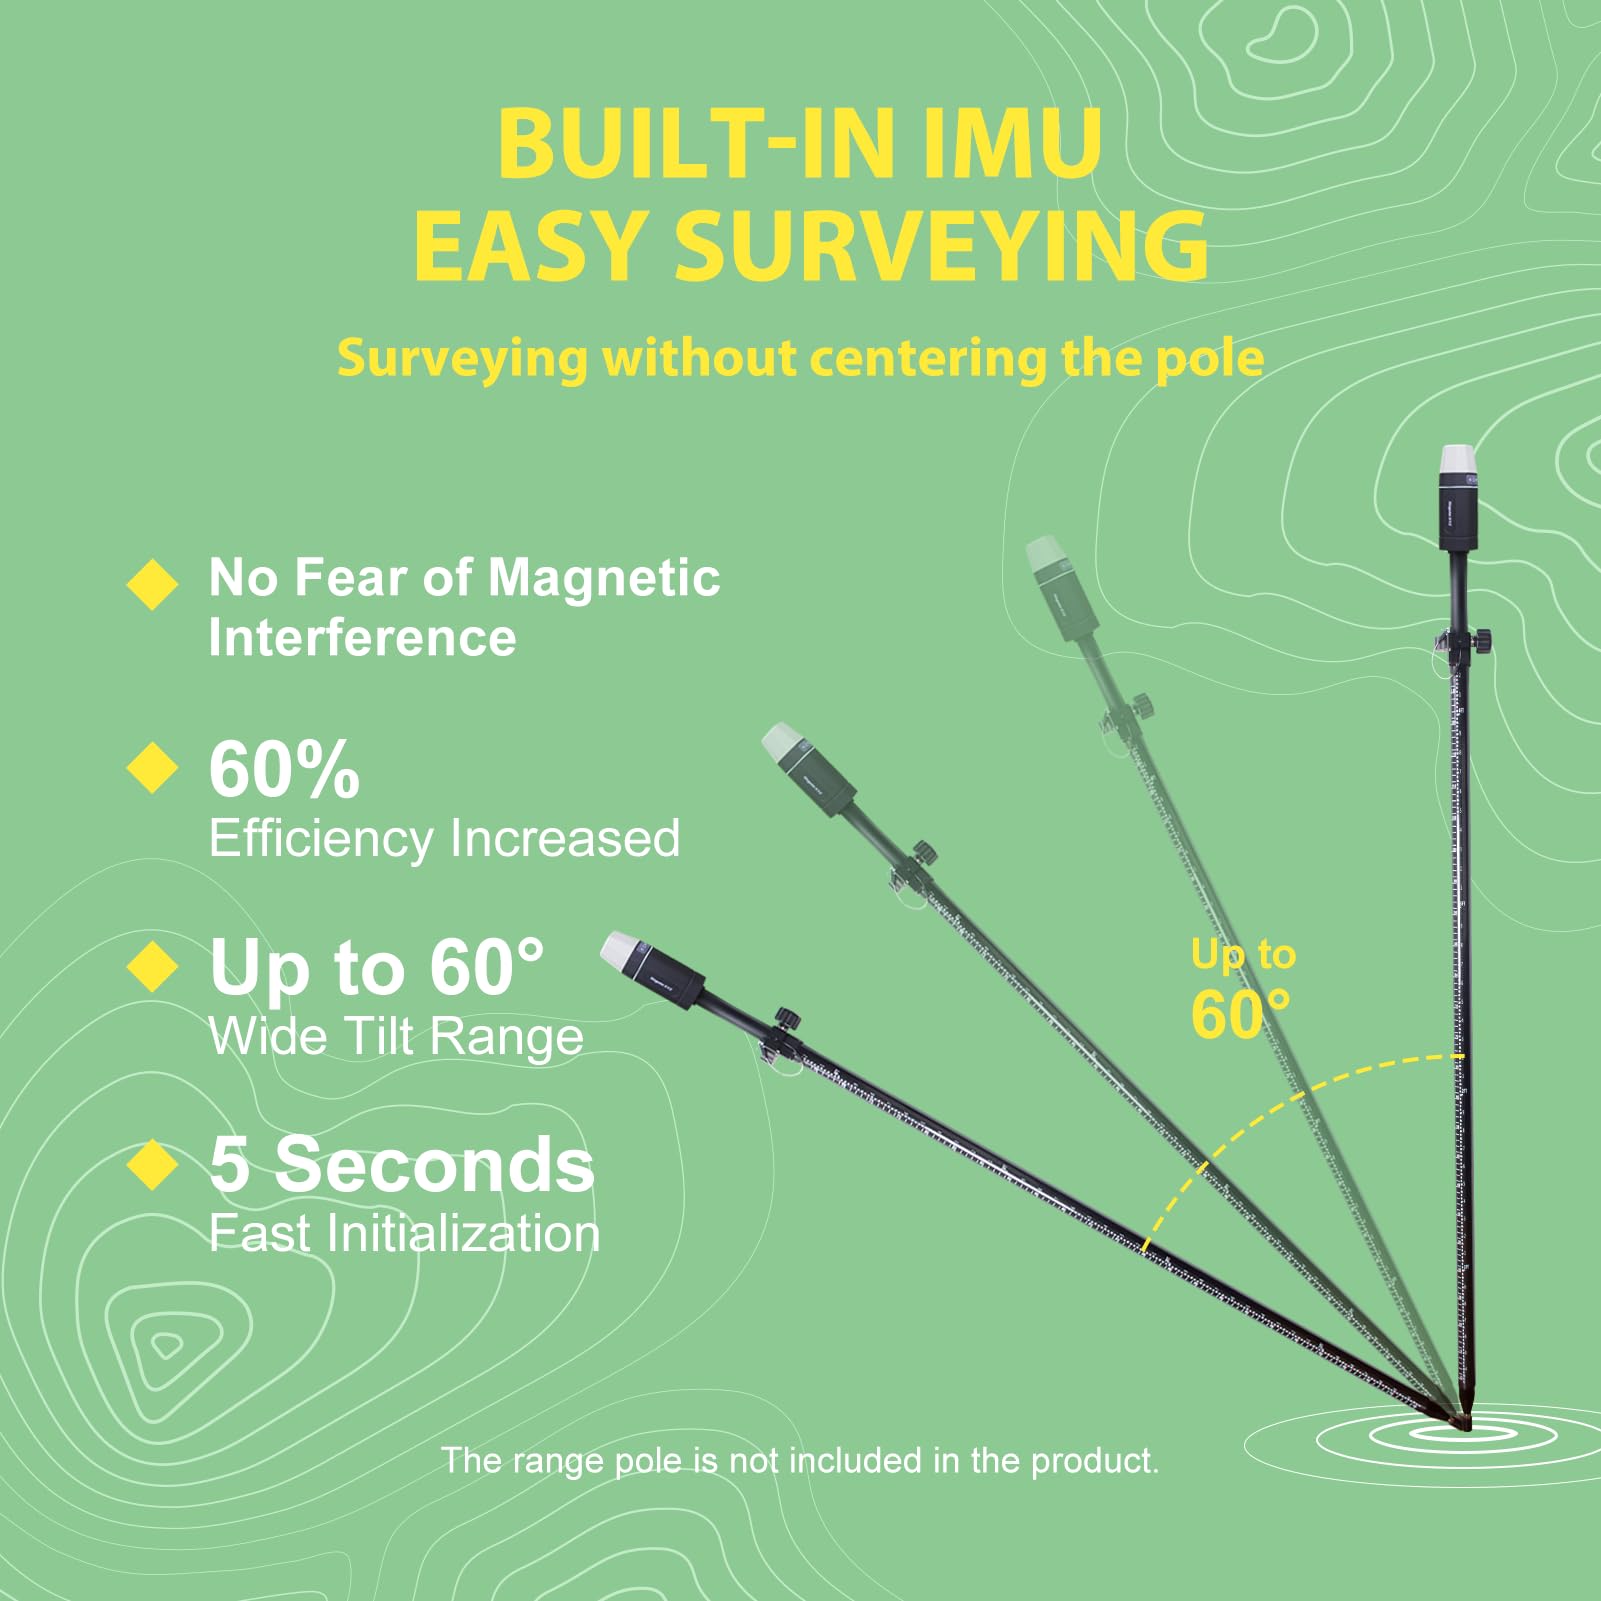 RTK GNSS Survey Equipment 60° Tilt Built-in IMU, Equipped with Rover Handheld GPS for Surveying and Survey Software. Ideal for Land Surveying, GIS, Mine Surveying, and Topographic Survey Applications